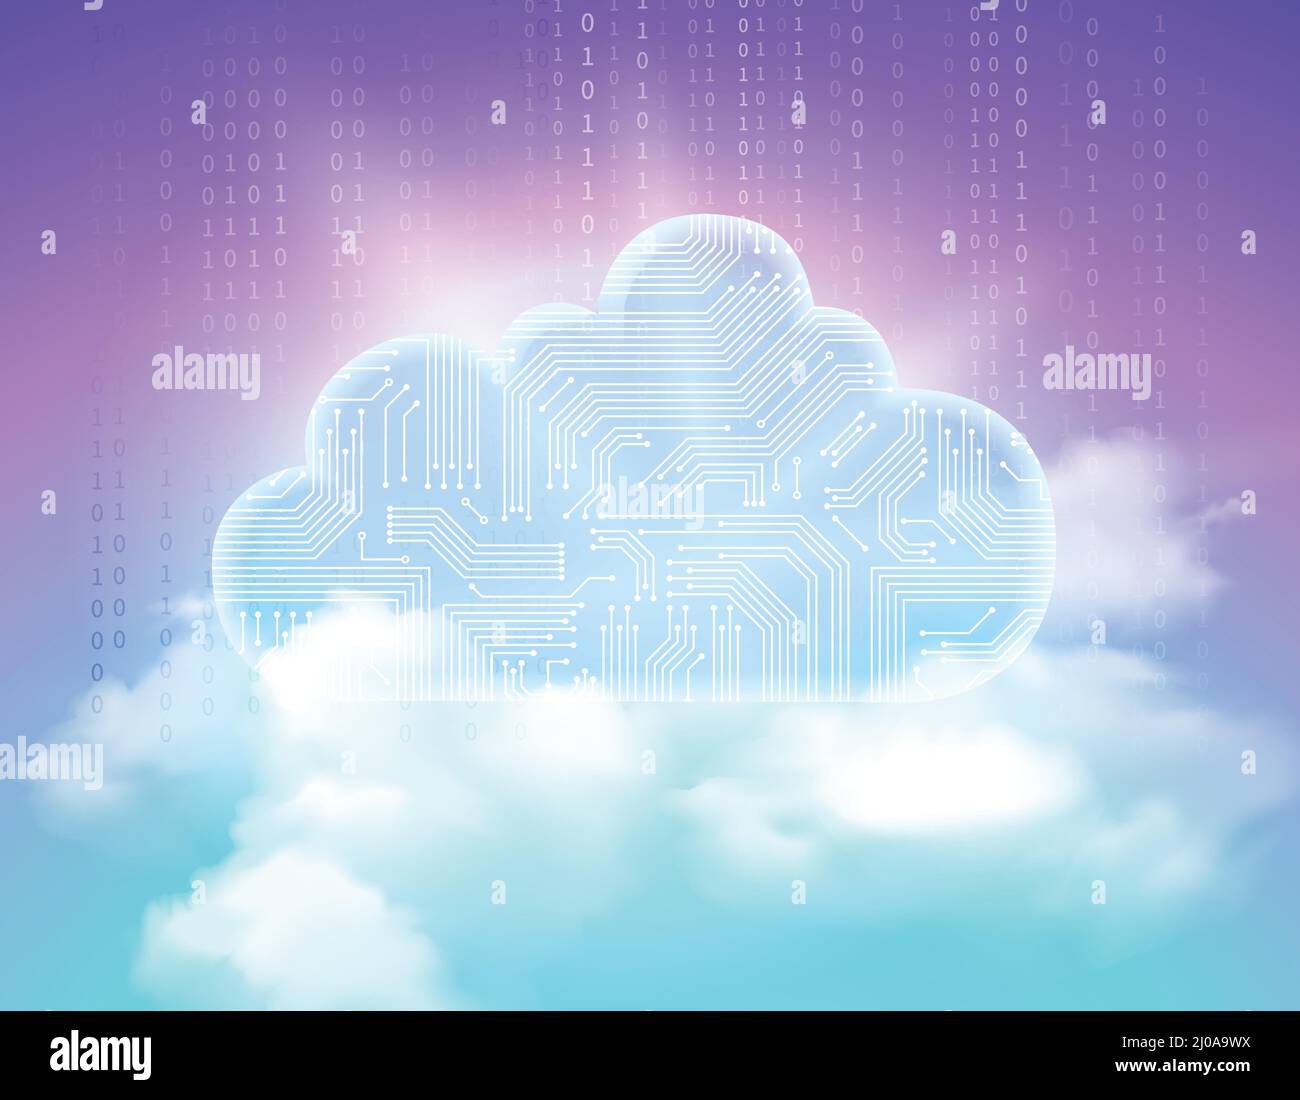 Safe data storage service shining electronic circuits cloud symbol above realistic sky radiant colorful background vector illustration Stock Vector